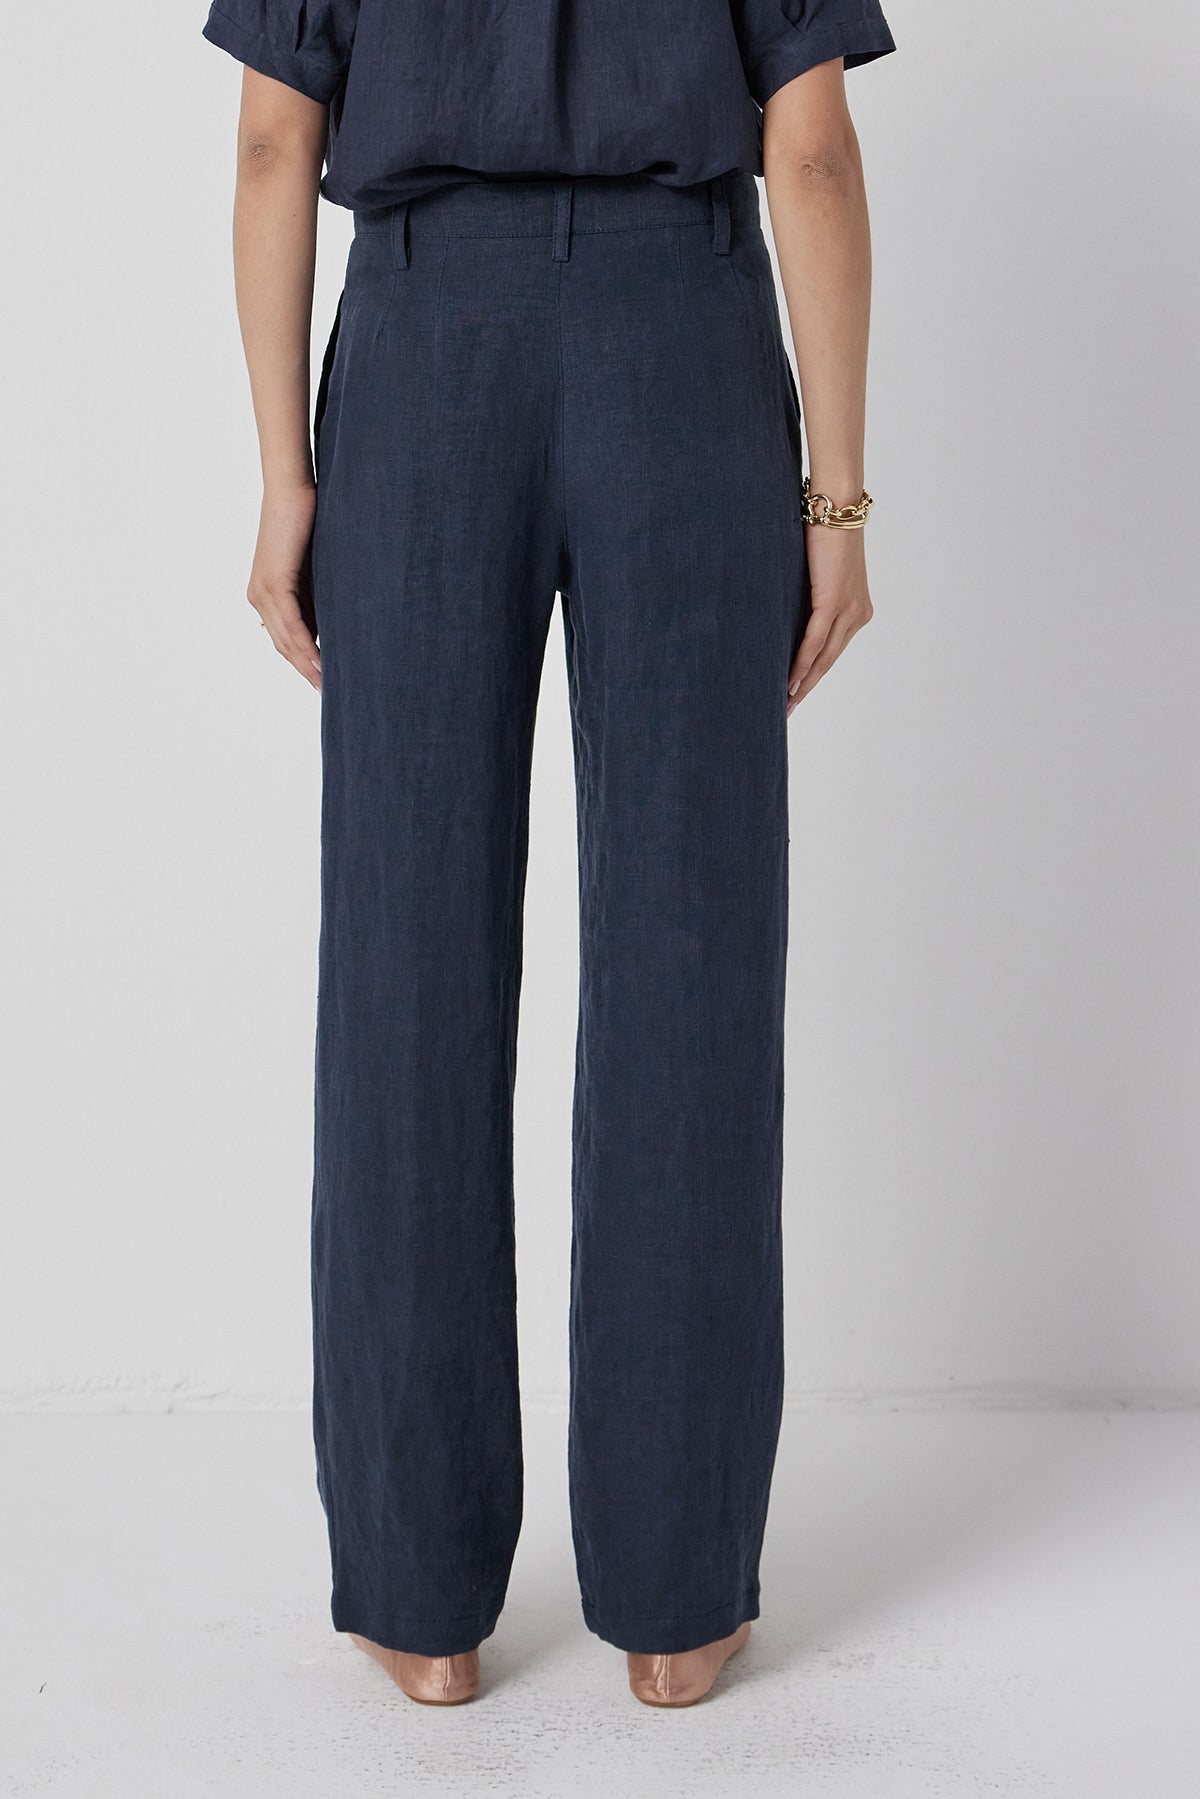 A person standing in Velvet by Jenny Graham's POMONA PANT trousers and a matching top with their hands partially tucked into pockets.-36409575735489